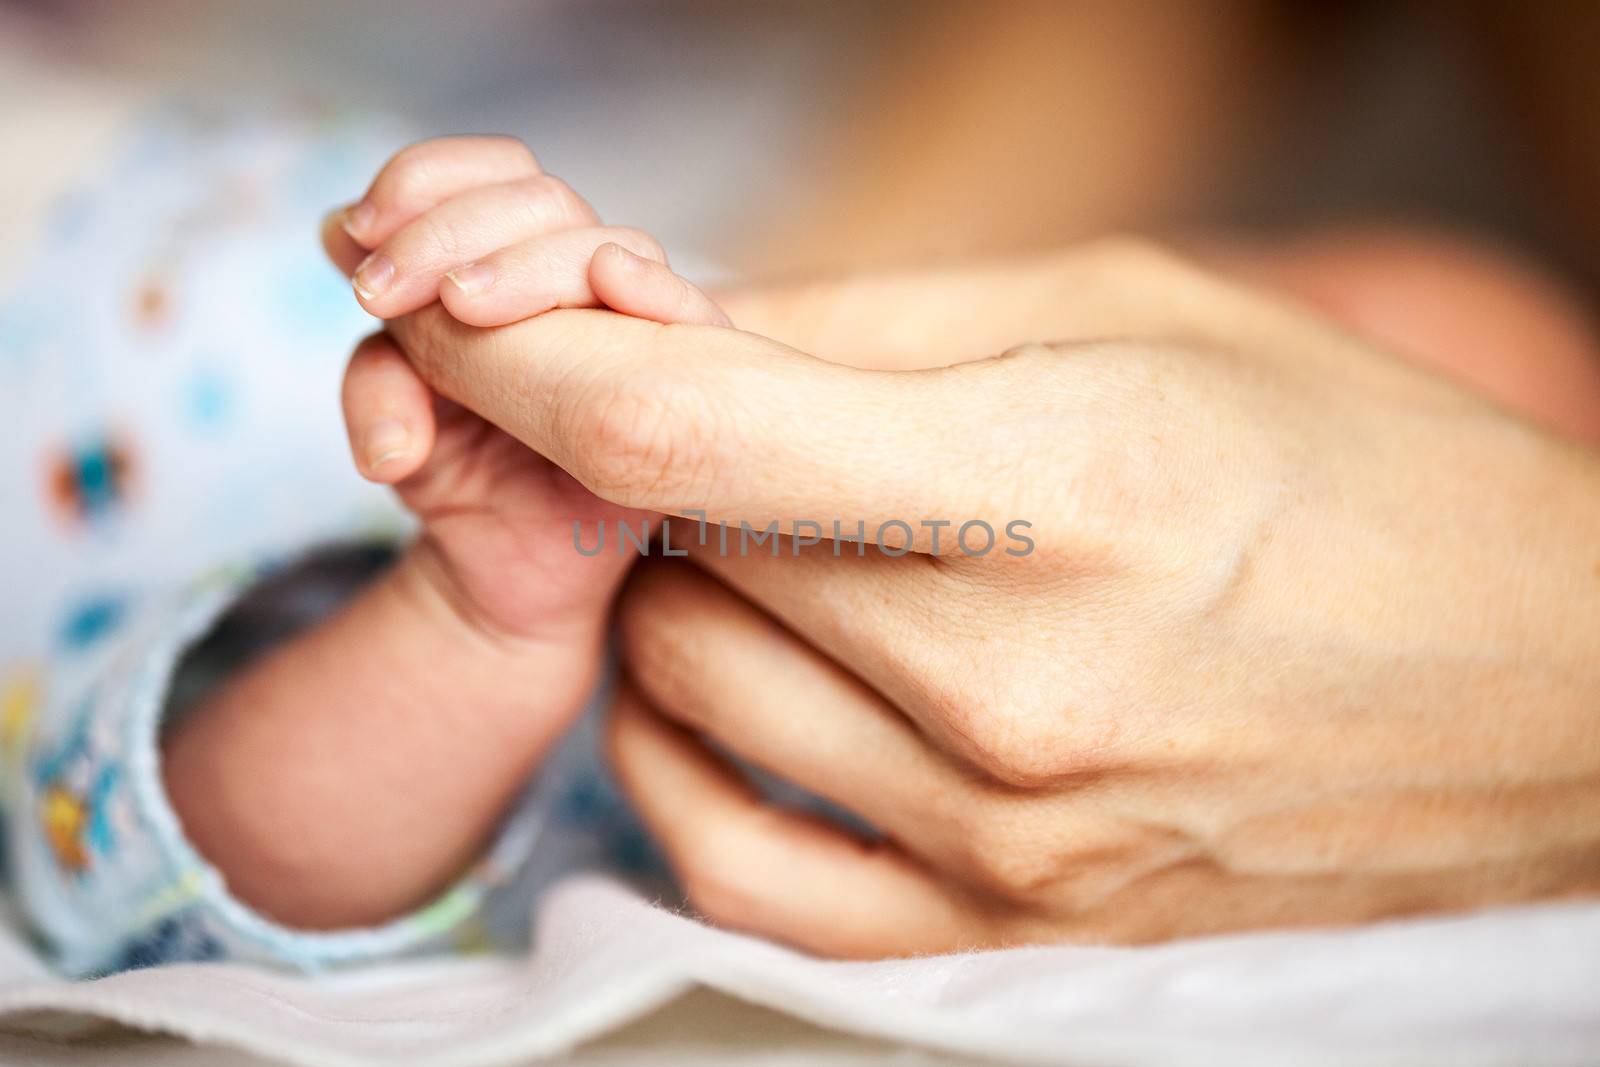 Newborn baby holding mother's hand, image with shallow depth of field